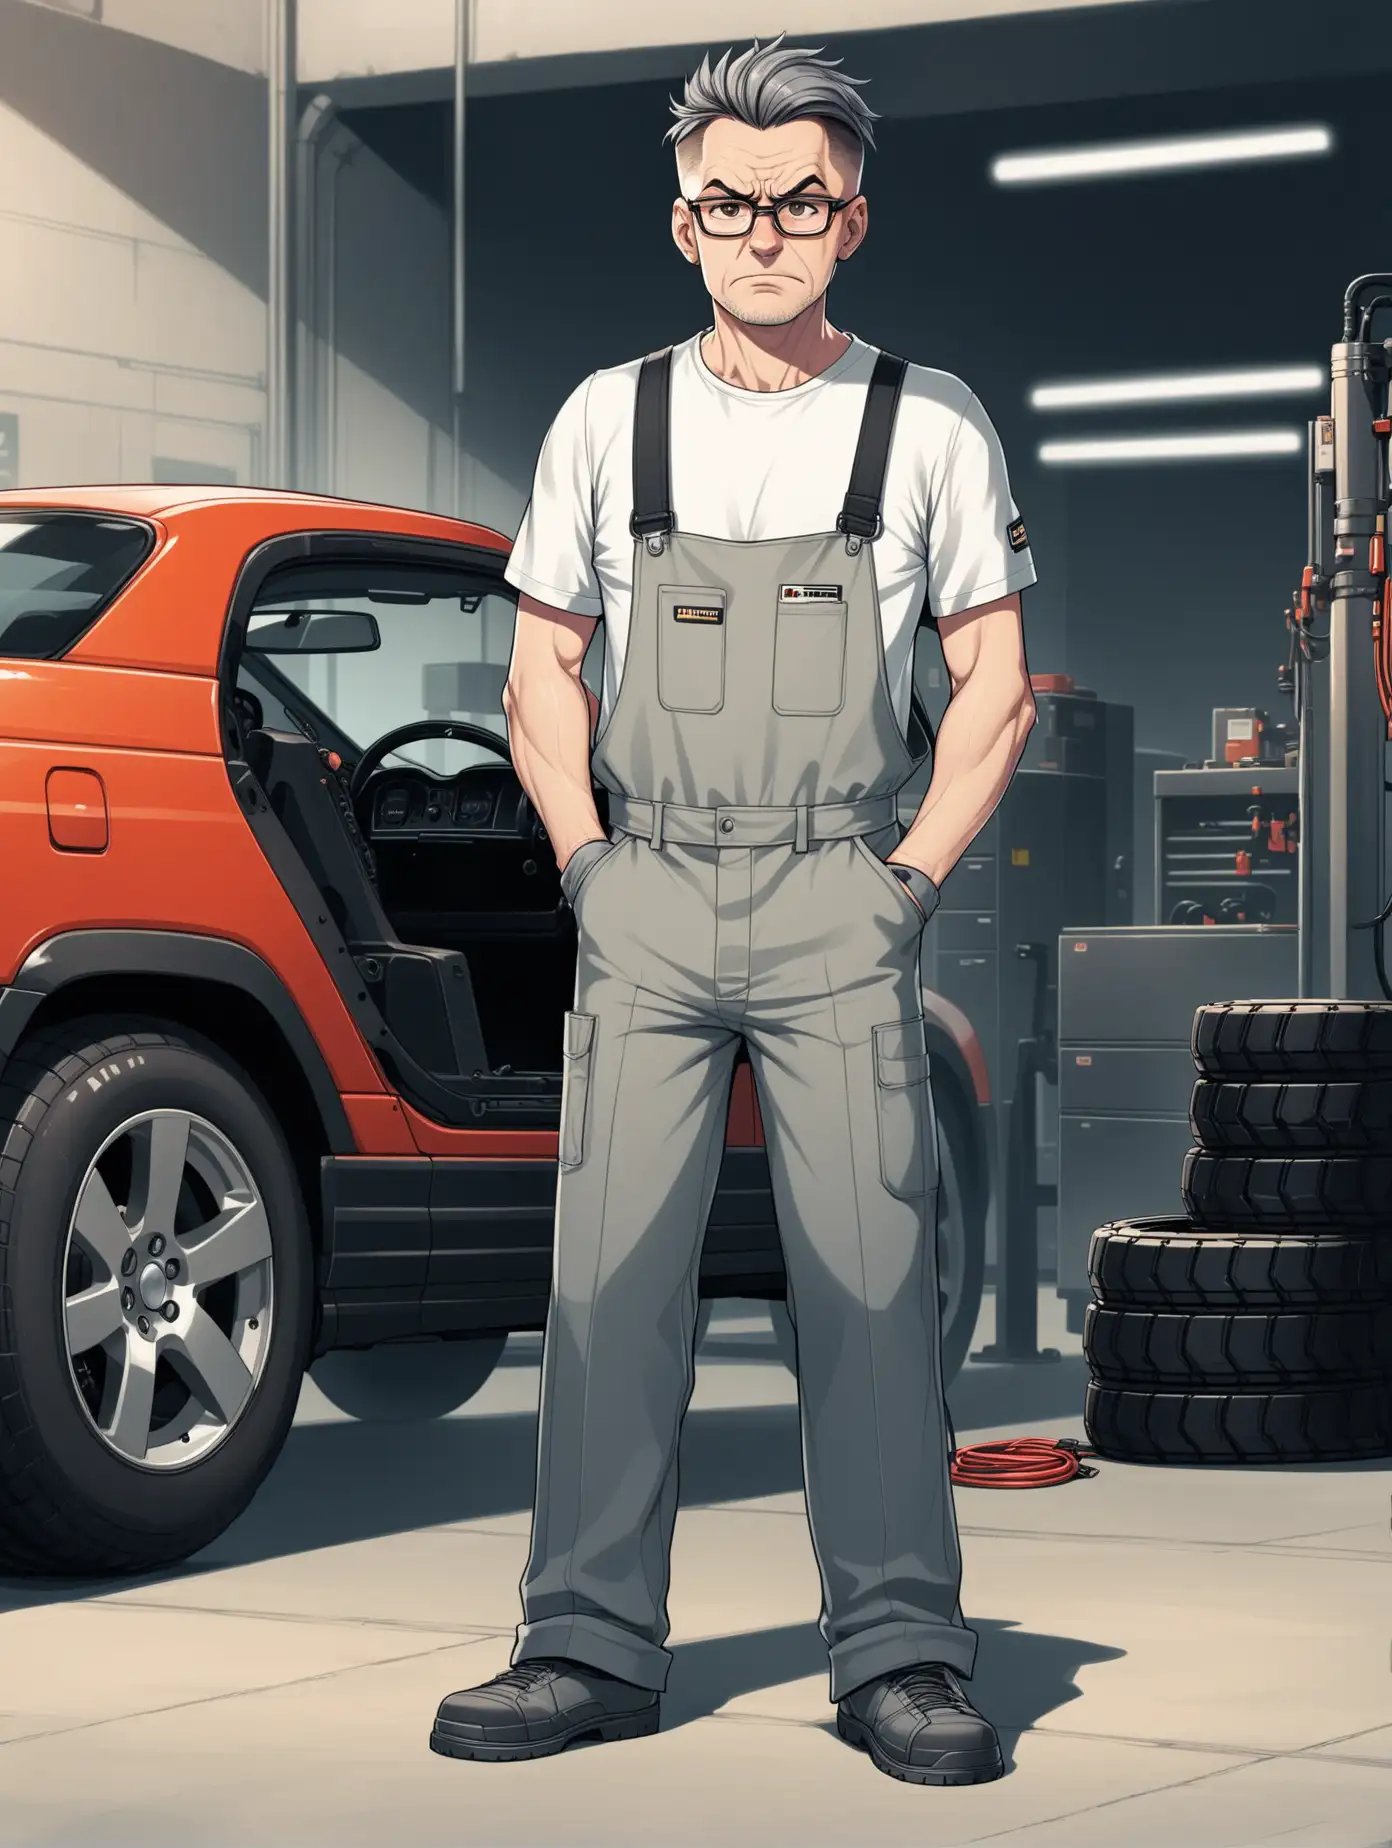 Middleaged-Auto-Mechanic-in-Glasses-Standing-Tall-with-a-Serious-Expression